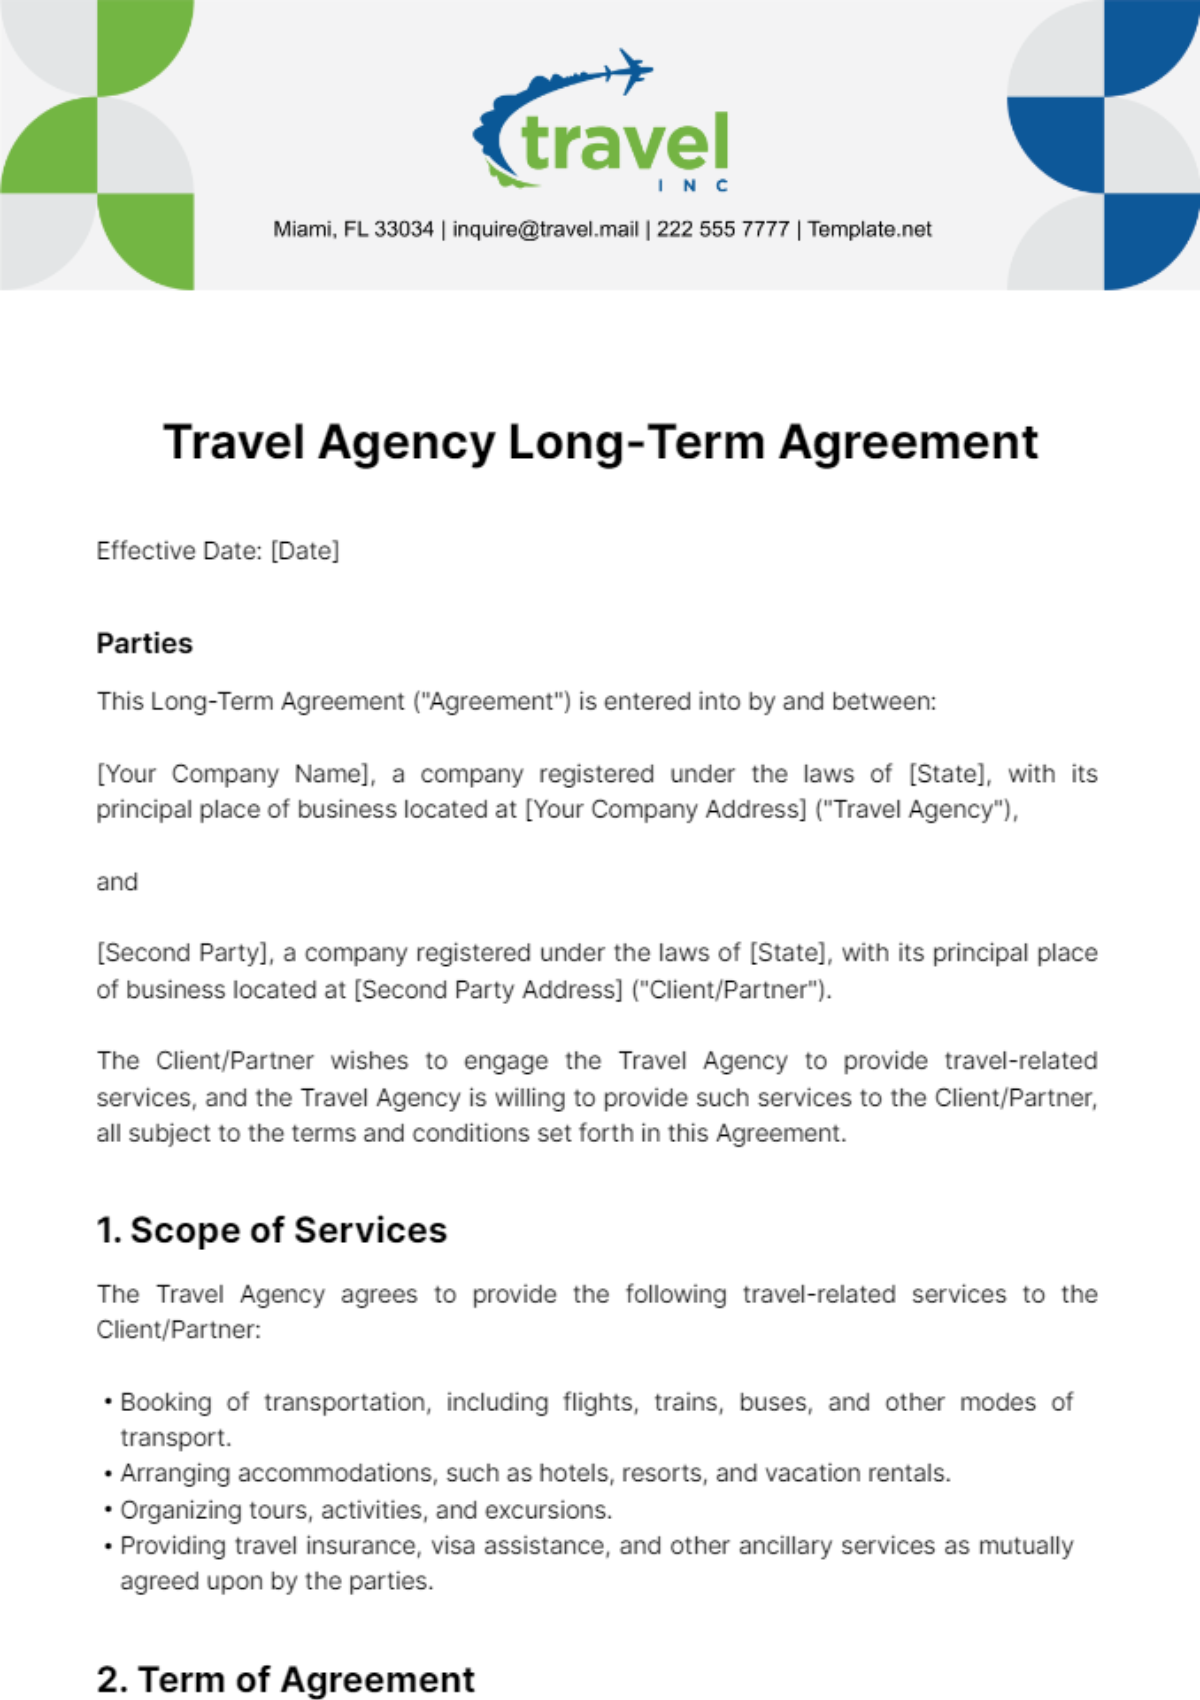 Travel Agency Long-Term Agreement Template